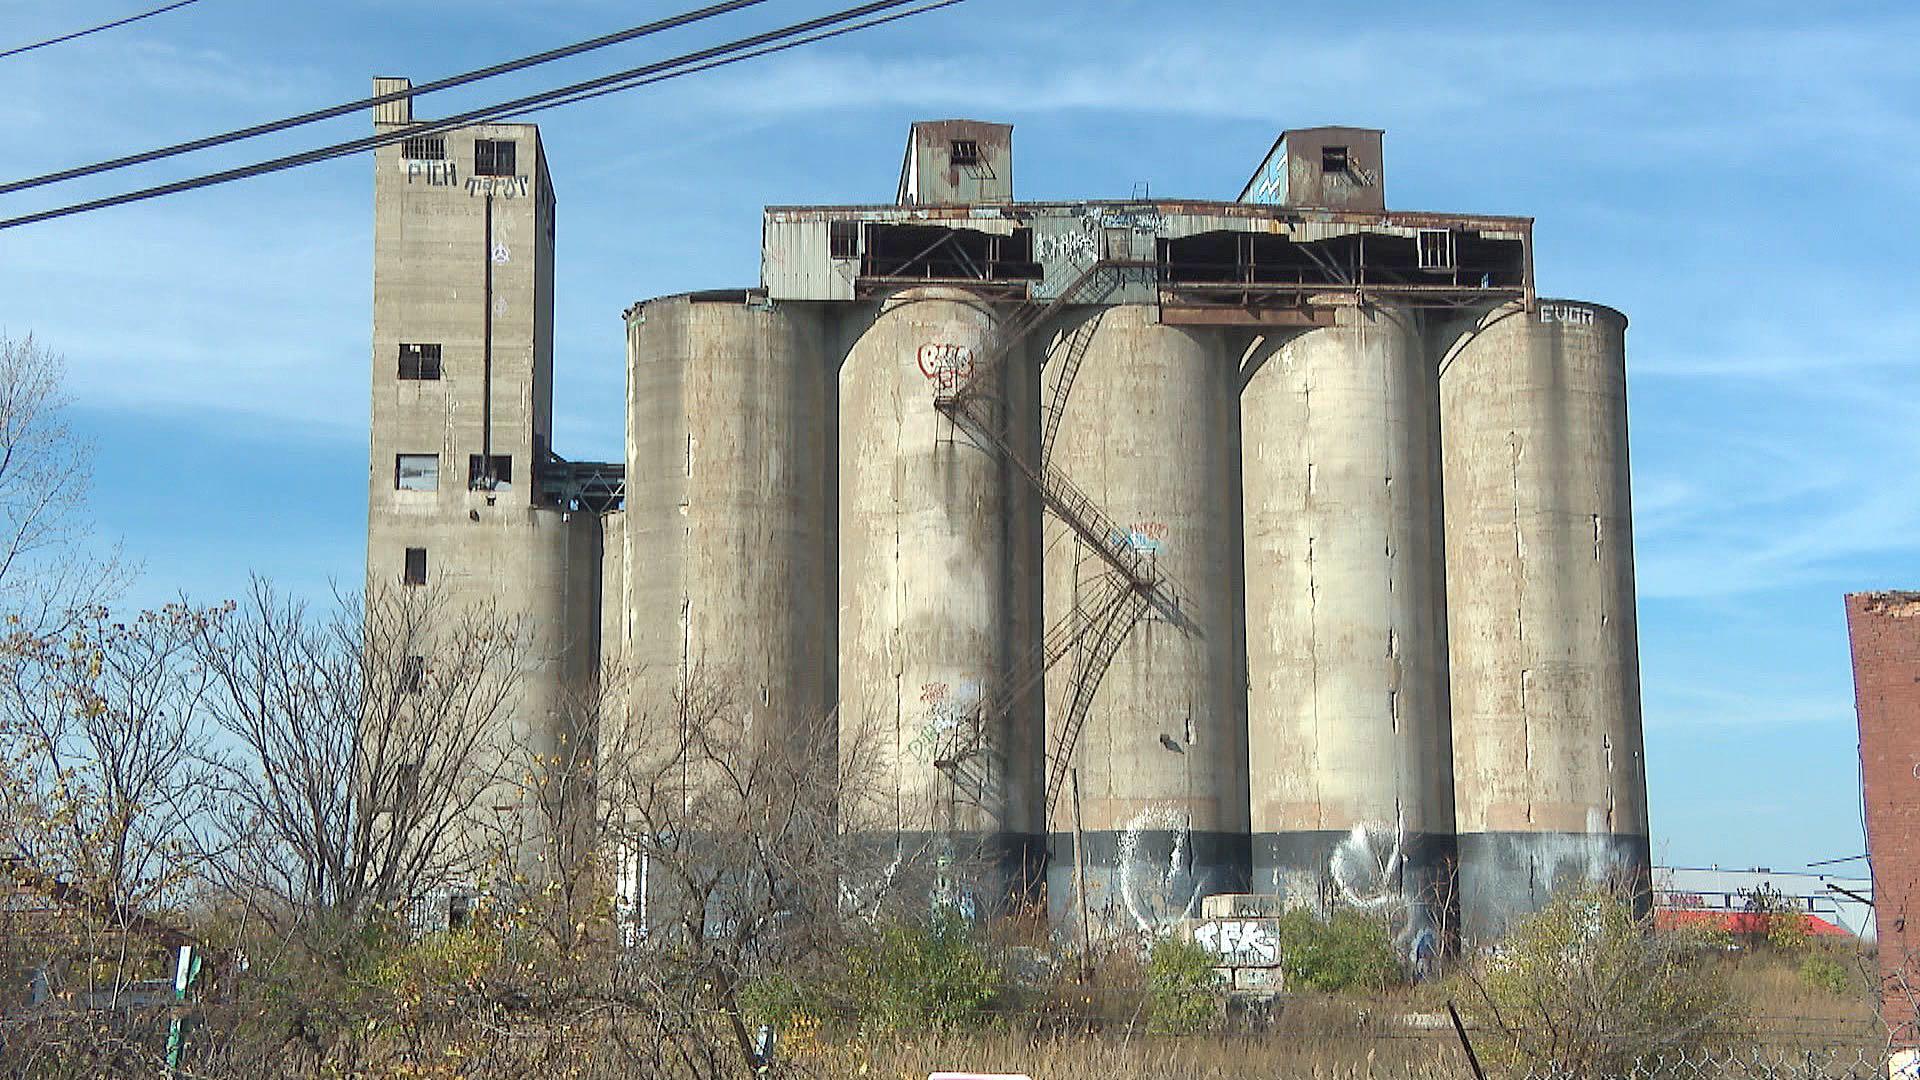 The proposed sale of the abandoned Damen Silos is drawing opposition from environmental and community groups. (WTTW News)